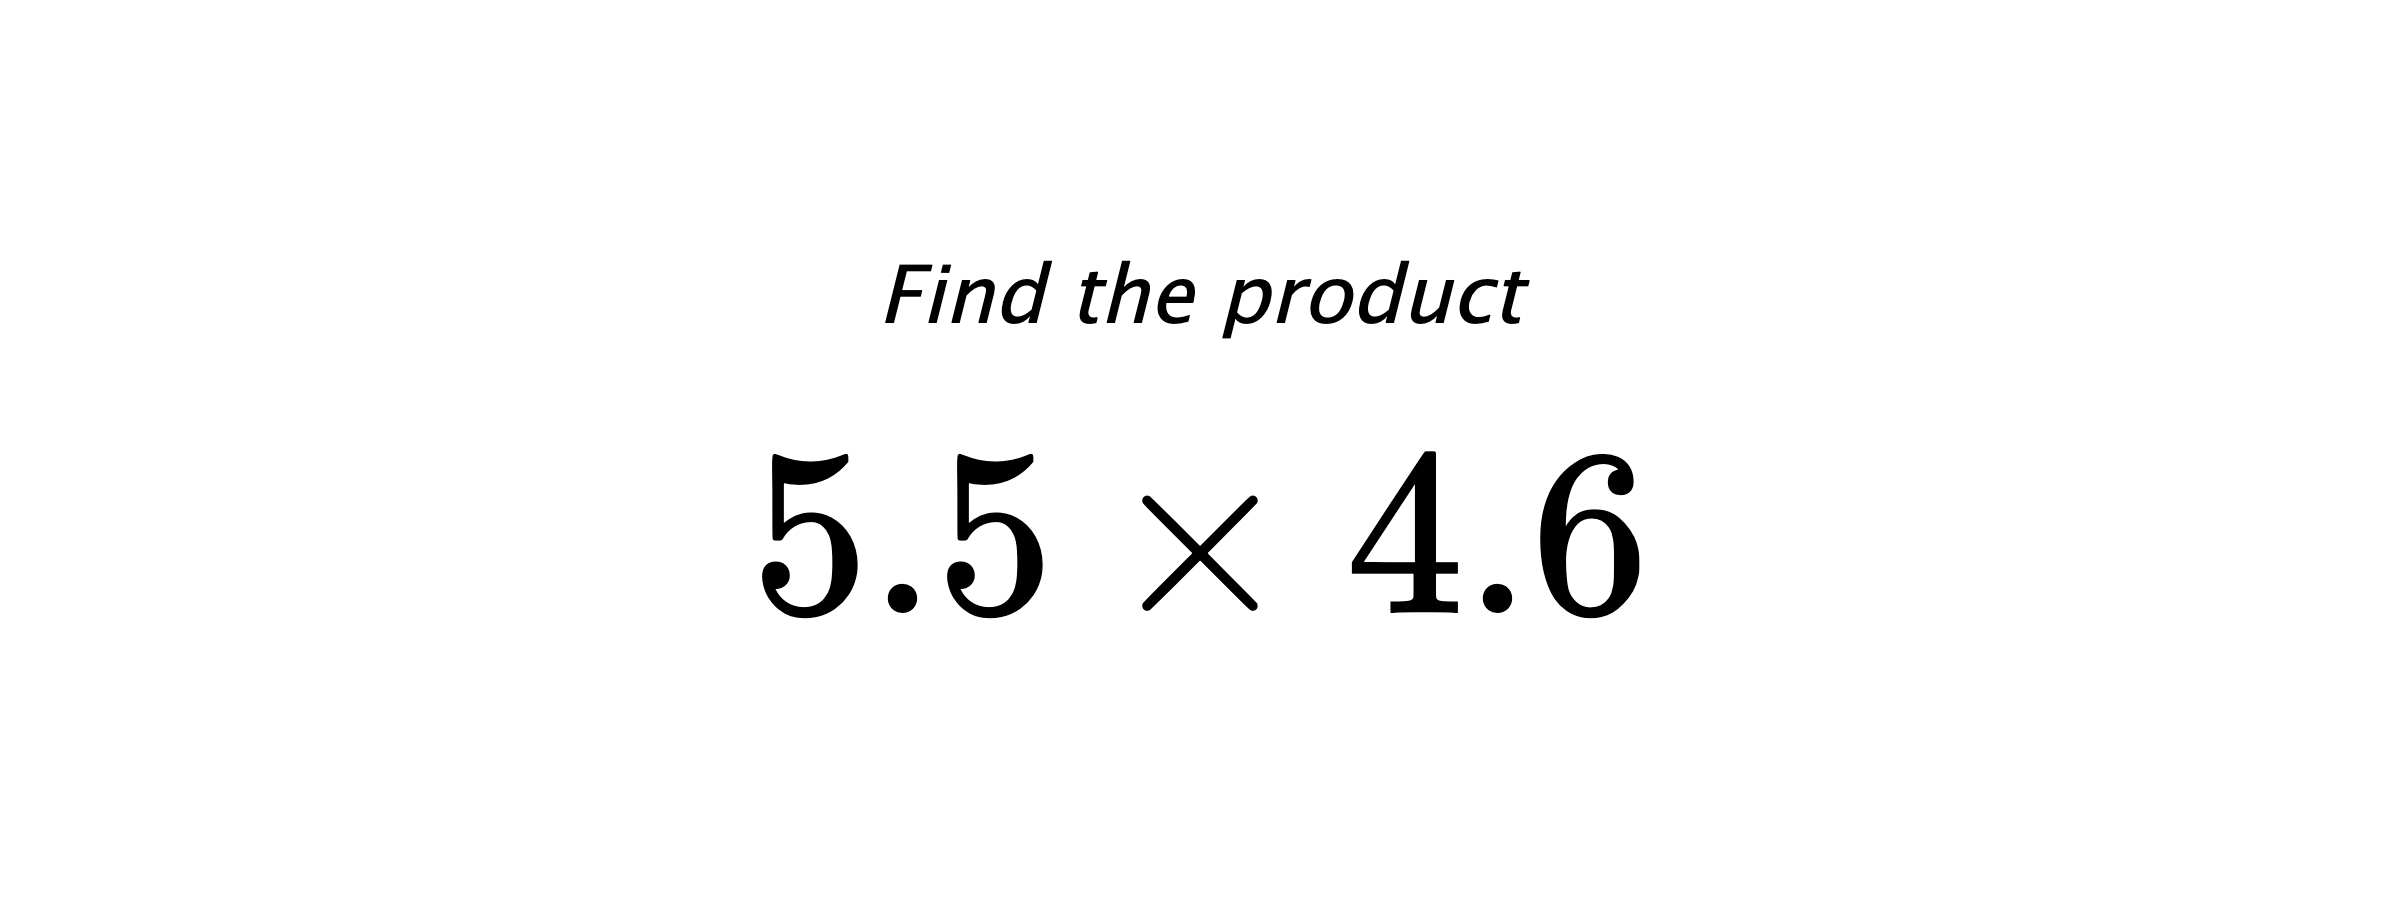 Find the product $ 5.5 \times 4.6 $